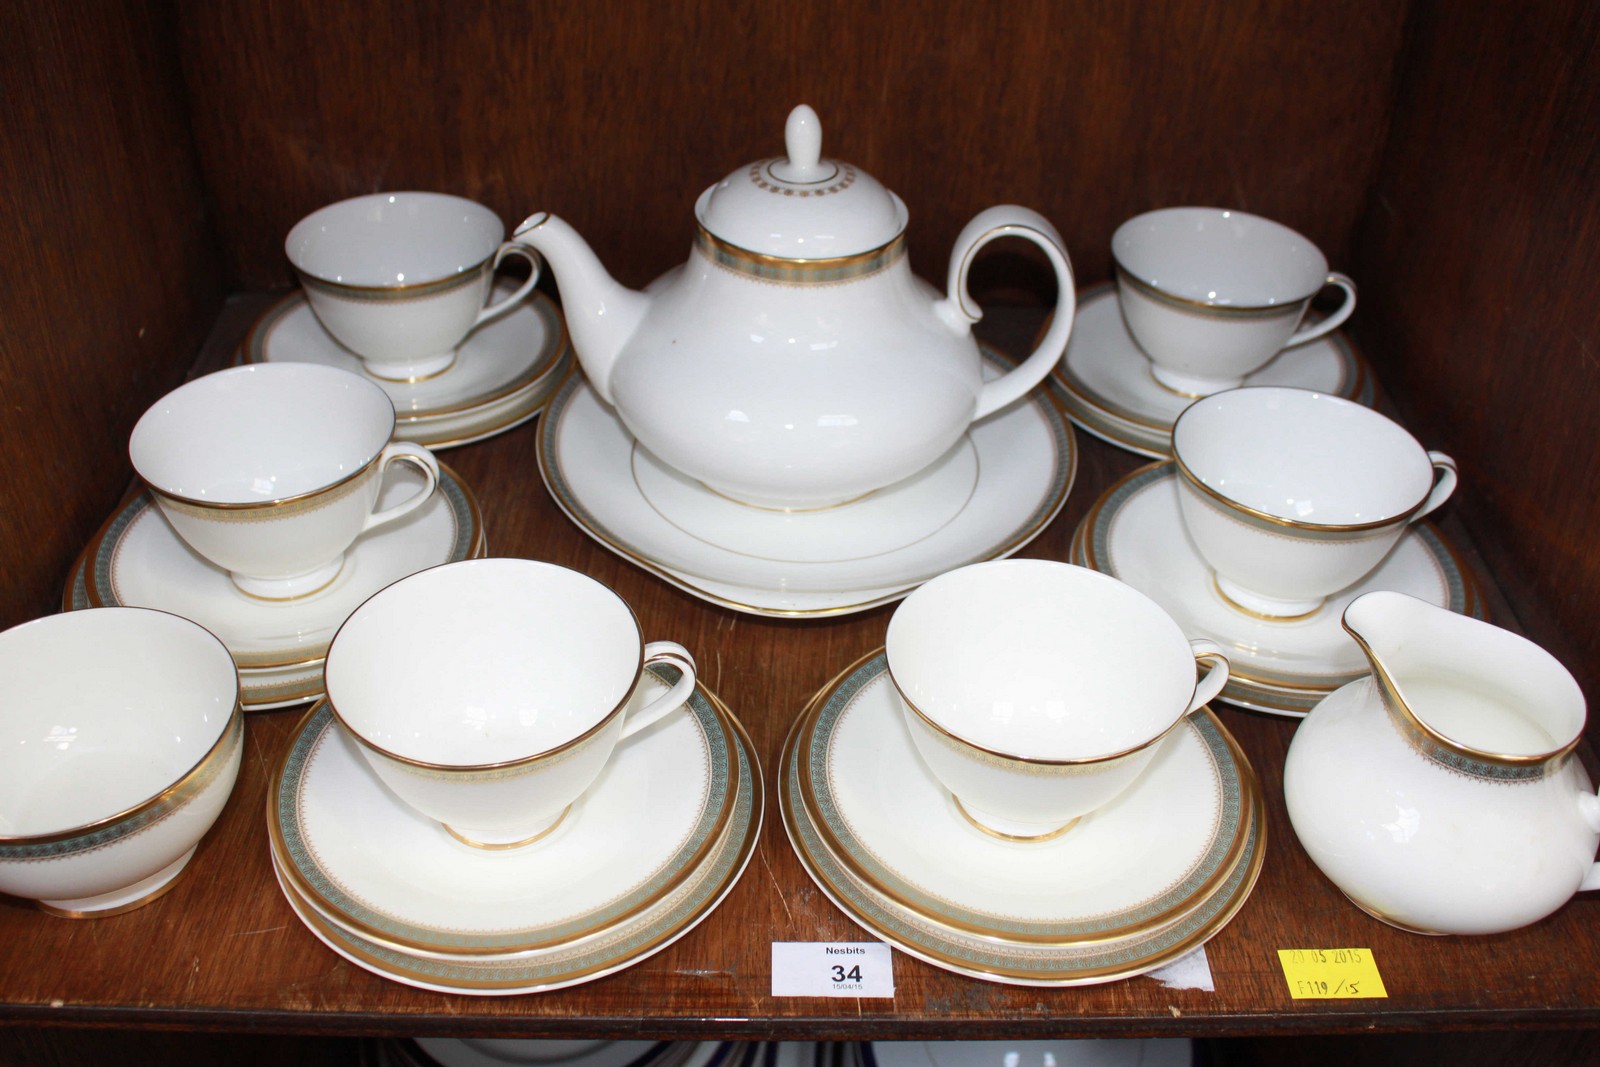 SECTION 34.  A Royal Doulton "Clarendon" pattern six-place teaset with teapot, cream and sugar bowl,